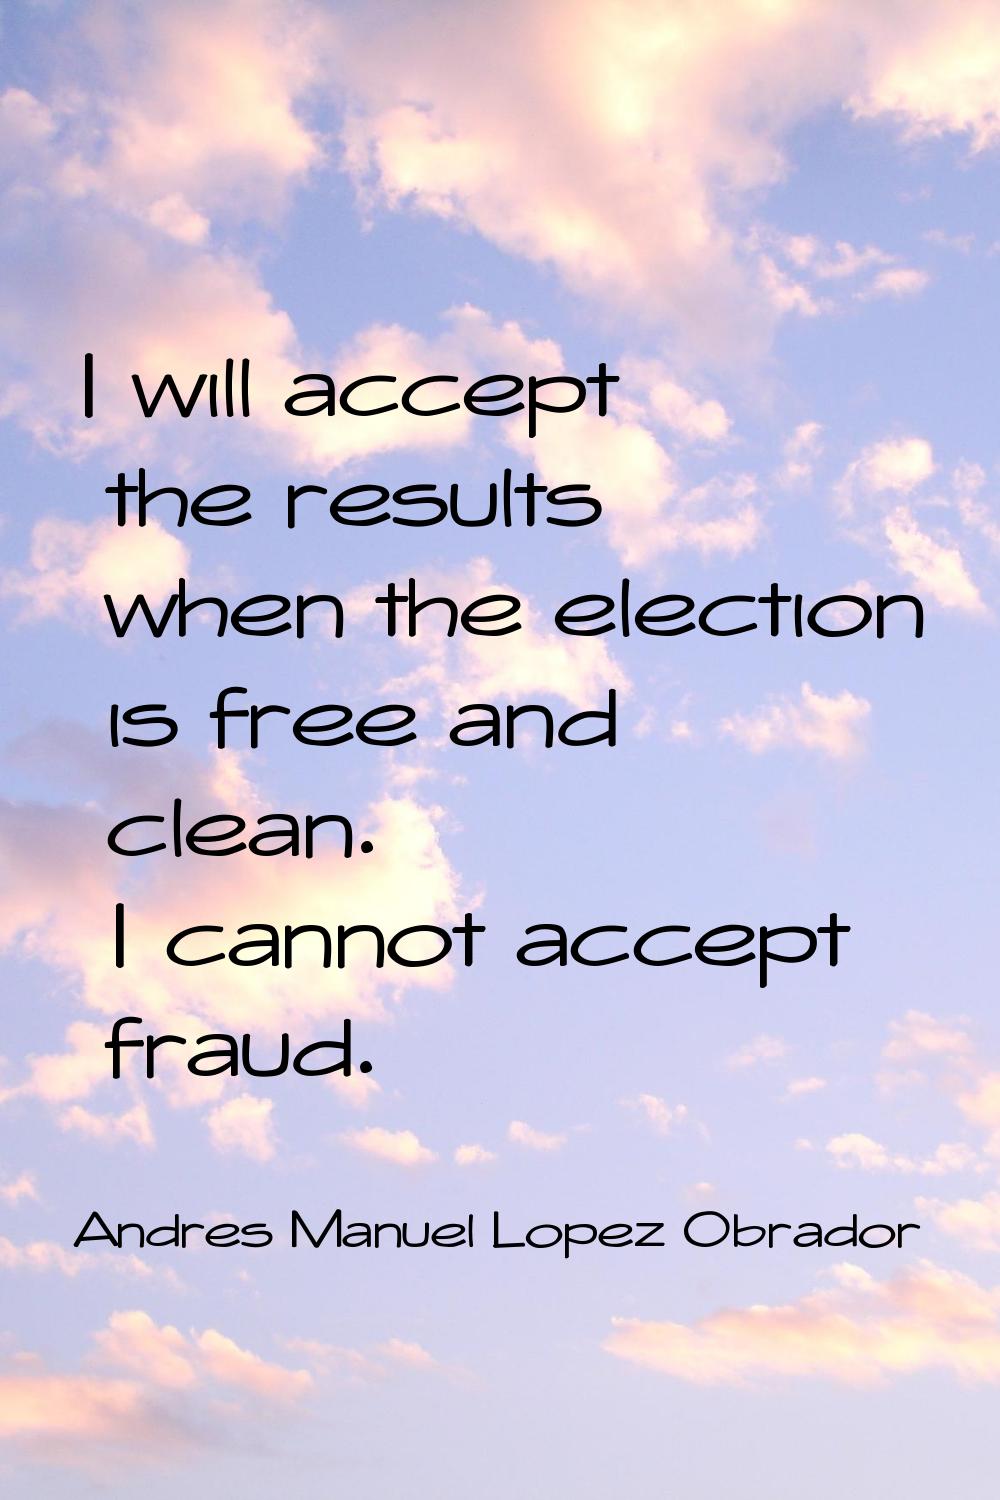 I will accept the results when the election is free and clean. I cannot accept fraud.